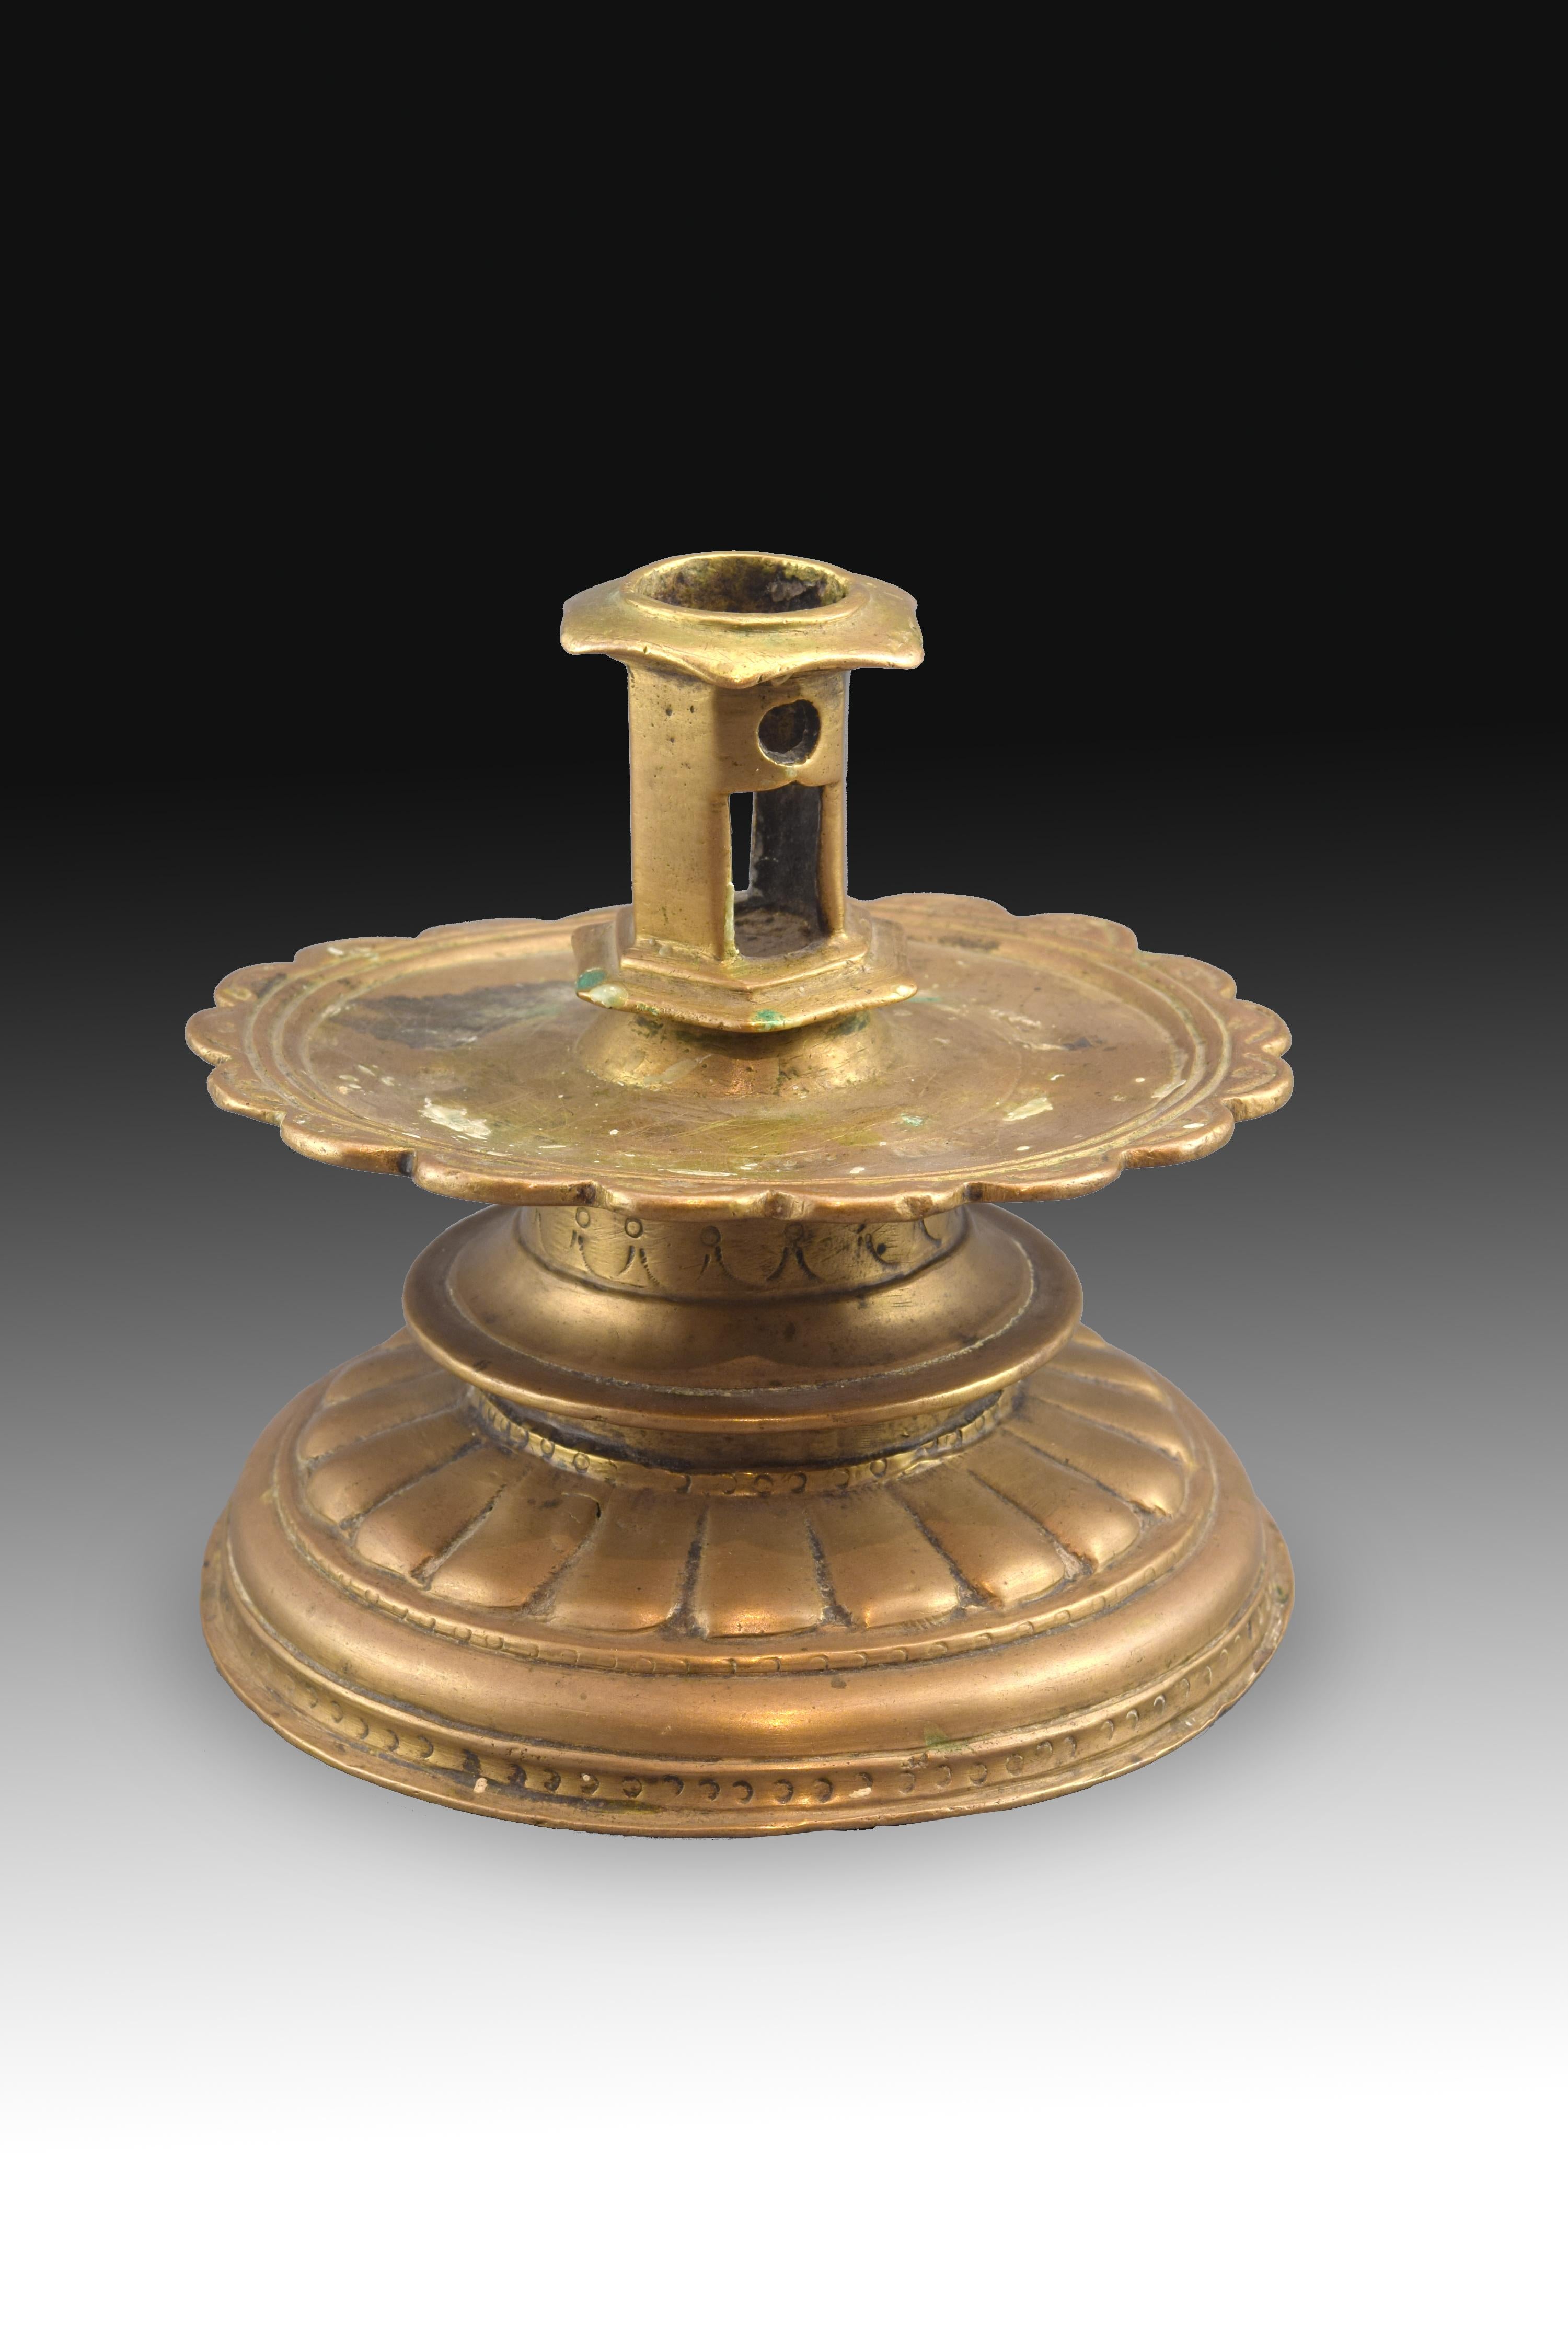 The shapes presented by this candleholder (which look like a reel or a bobbin, hence the name) do not follow the usual Flemish pieces of the time, much simpler. Compare, for example, with other pieces such as the Flemish candleholder dated between